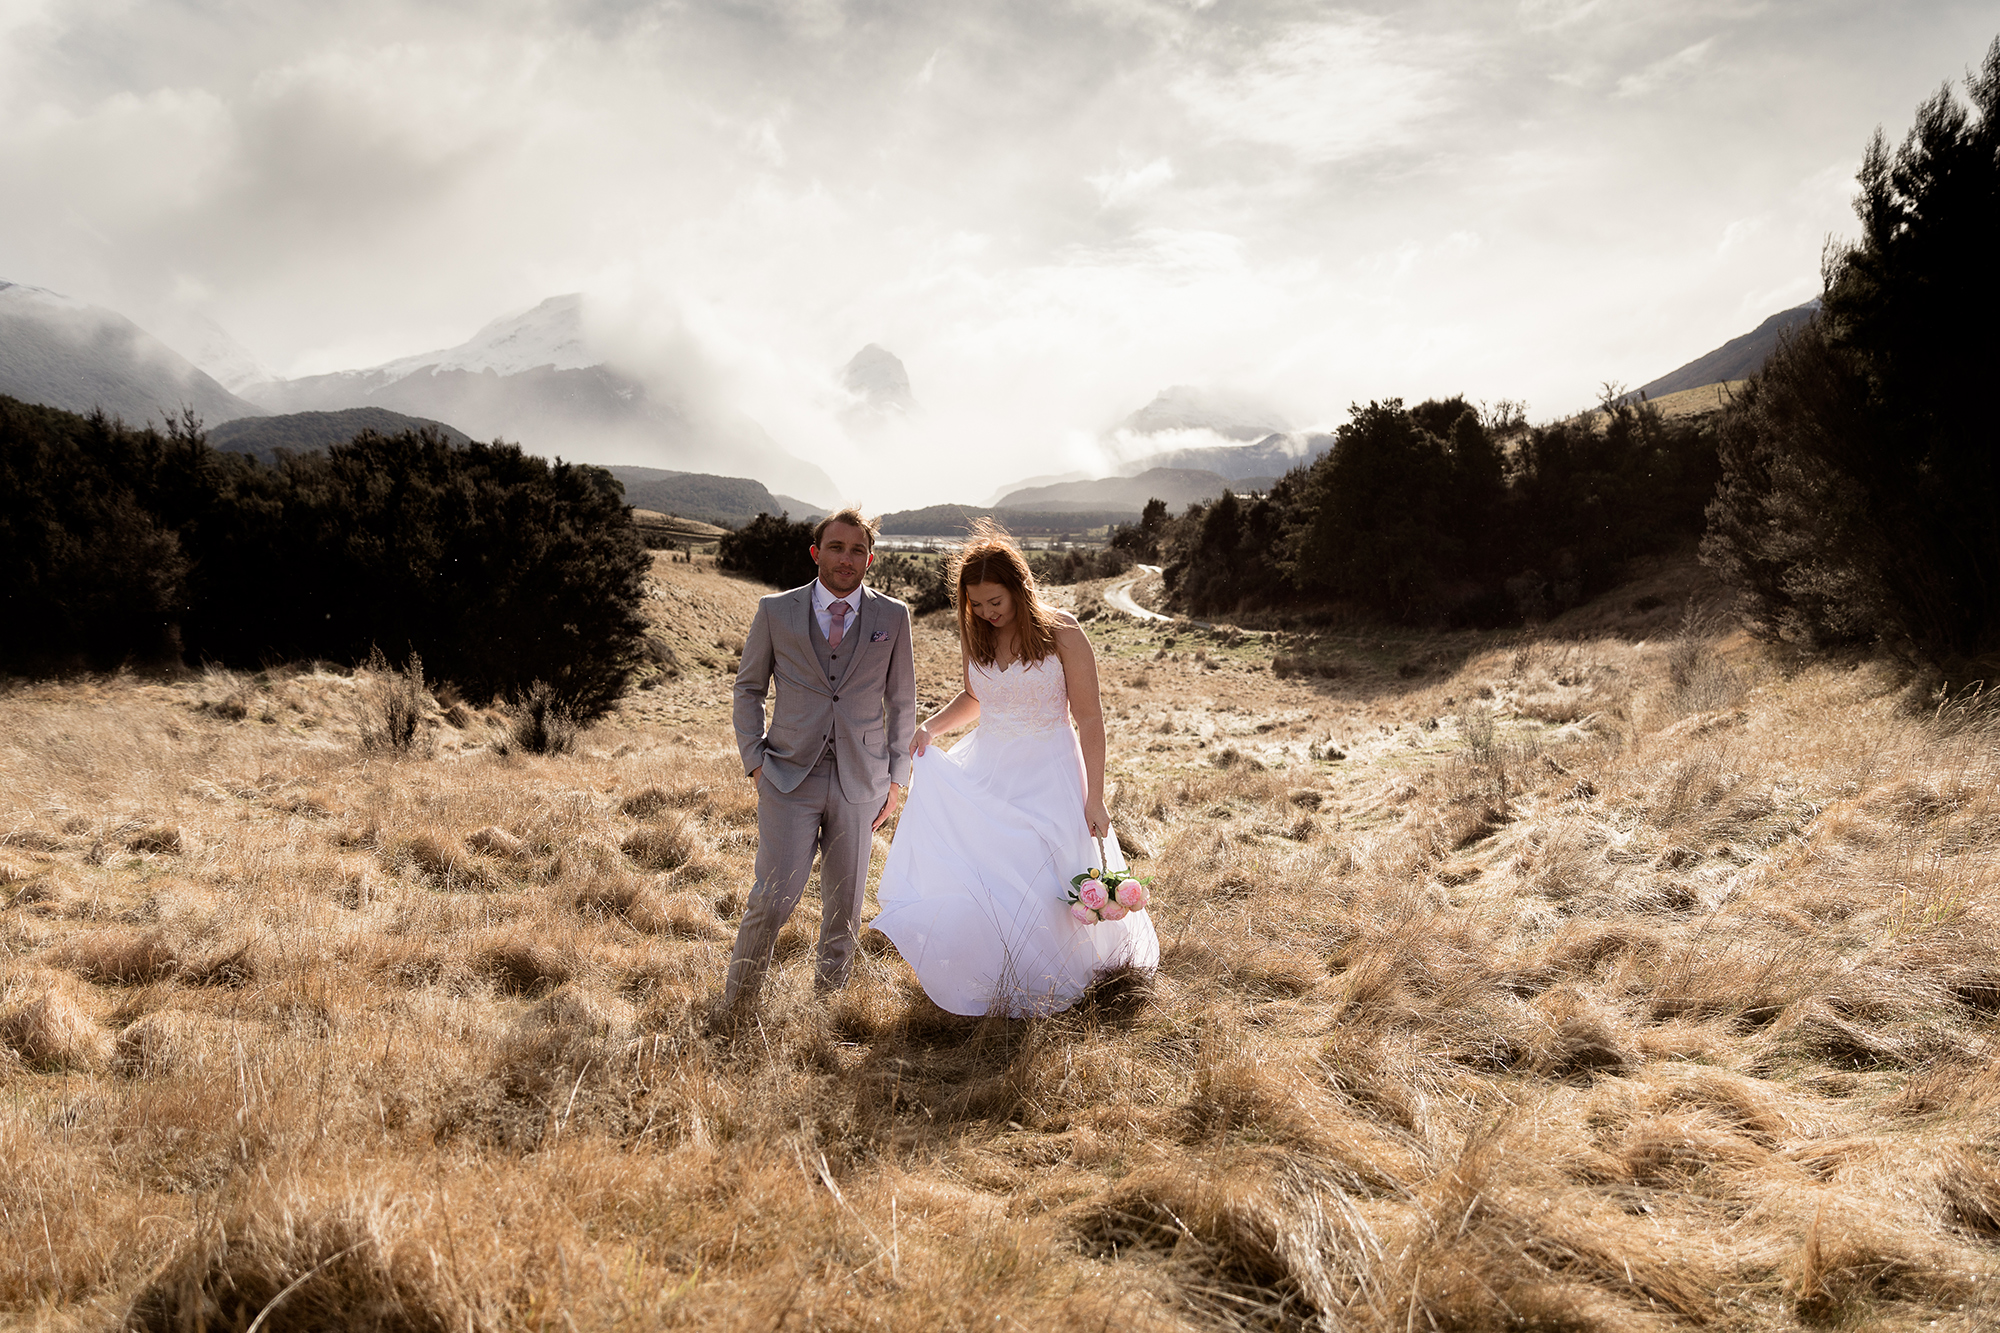 Tara and Raymond - Susan Miller Photography and Hitched in Paradise